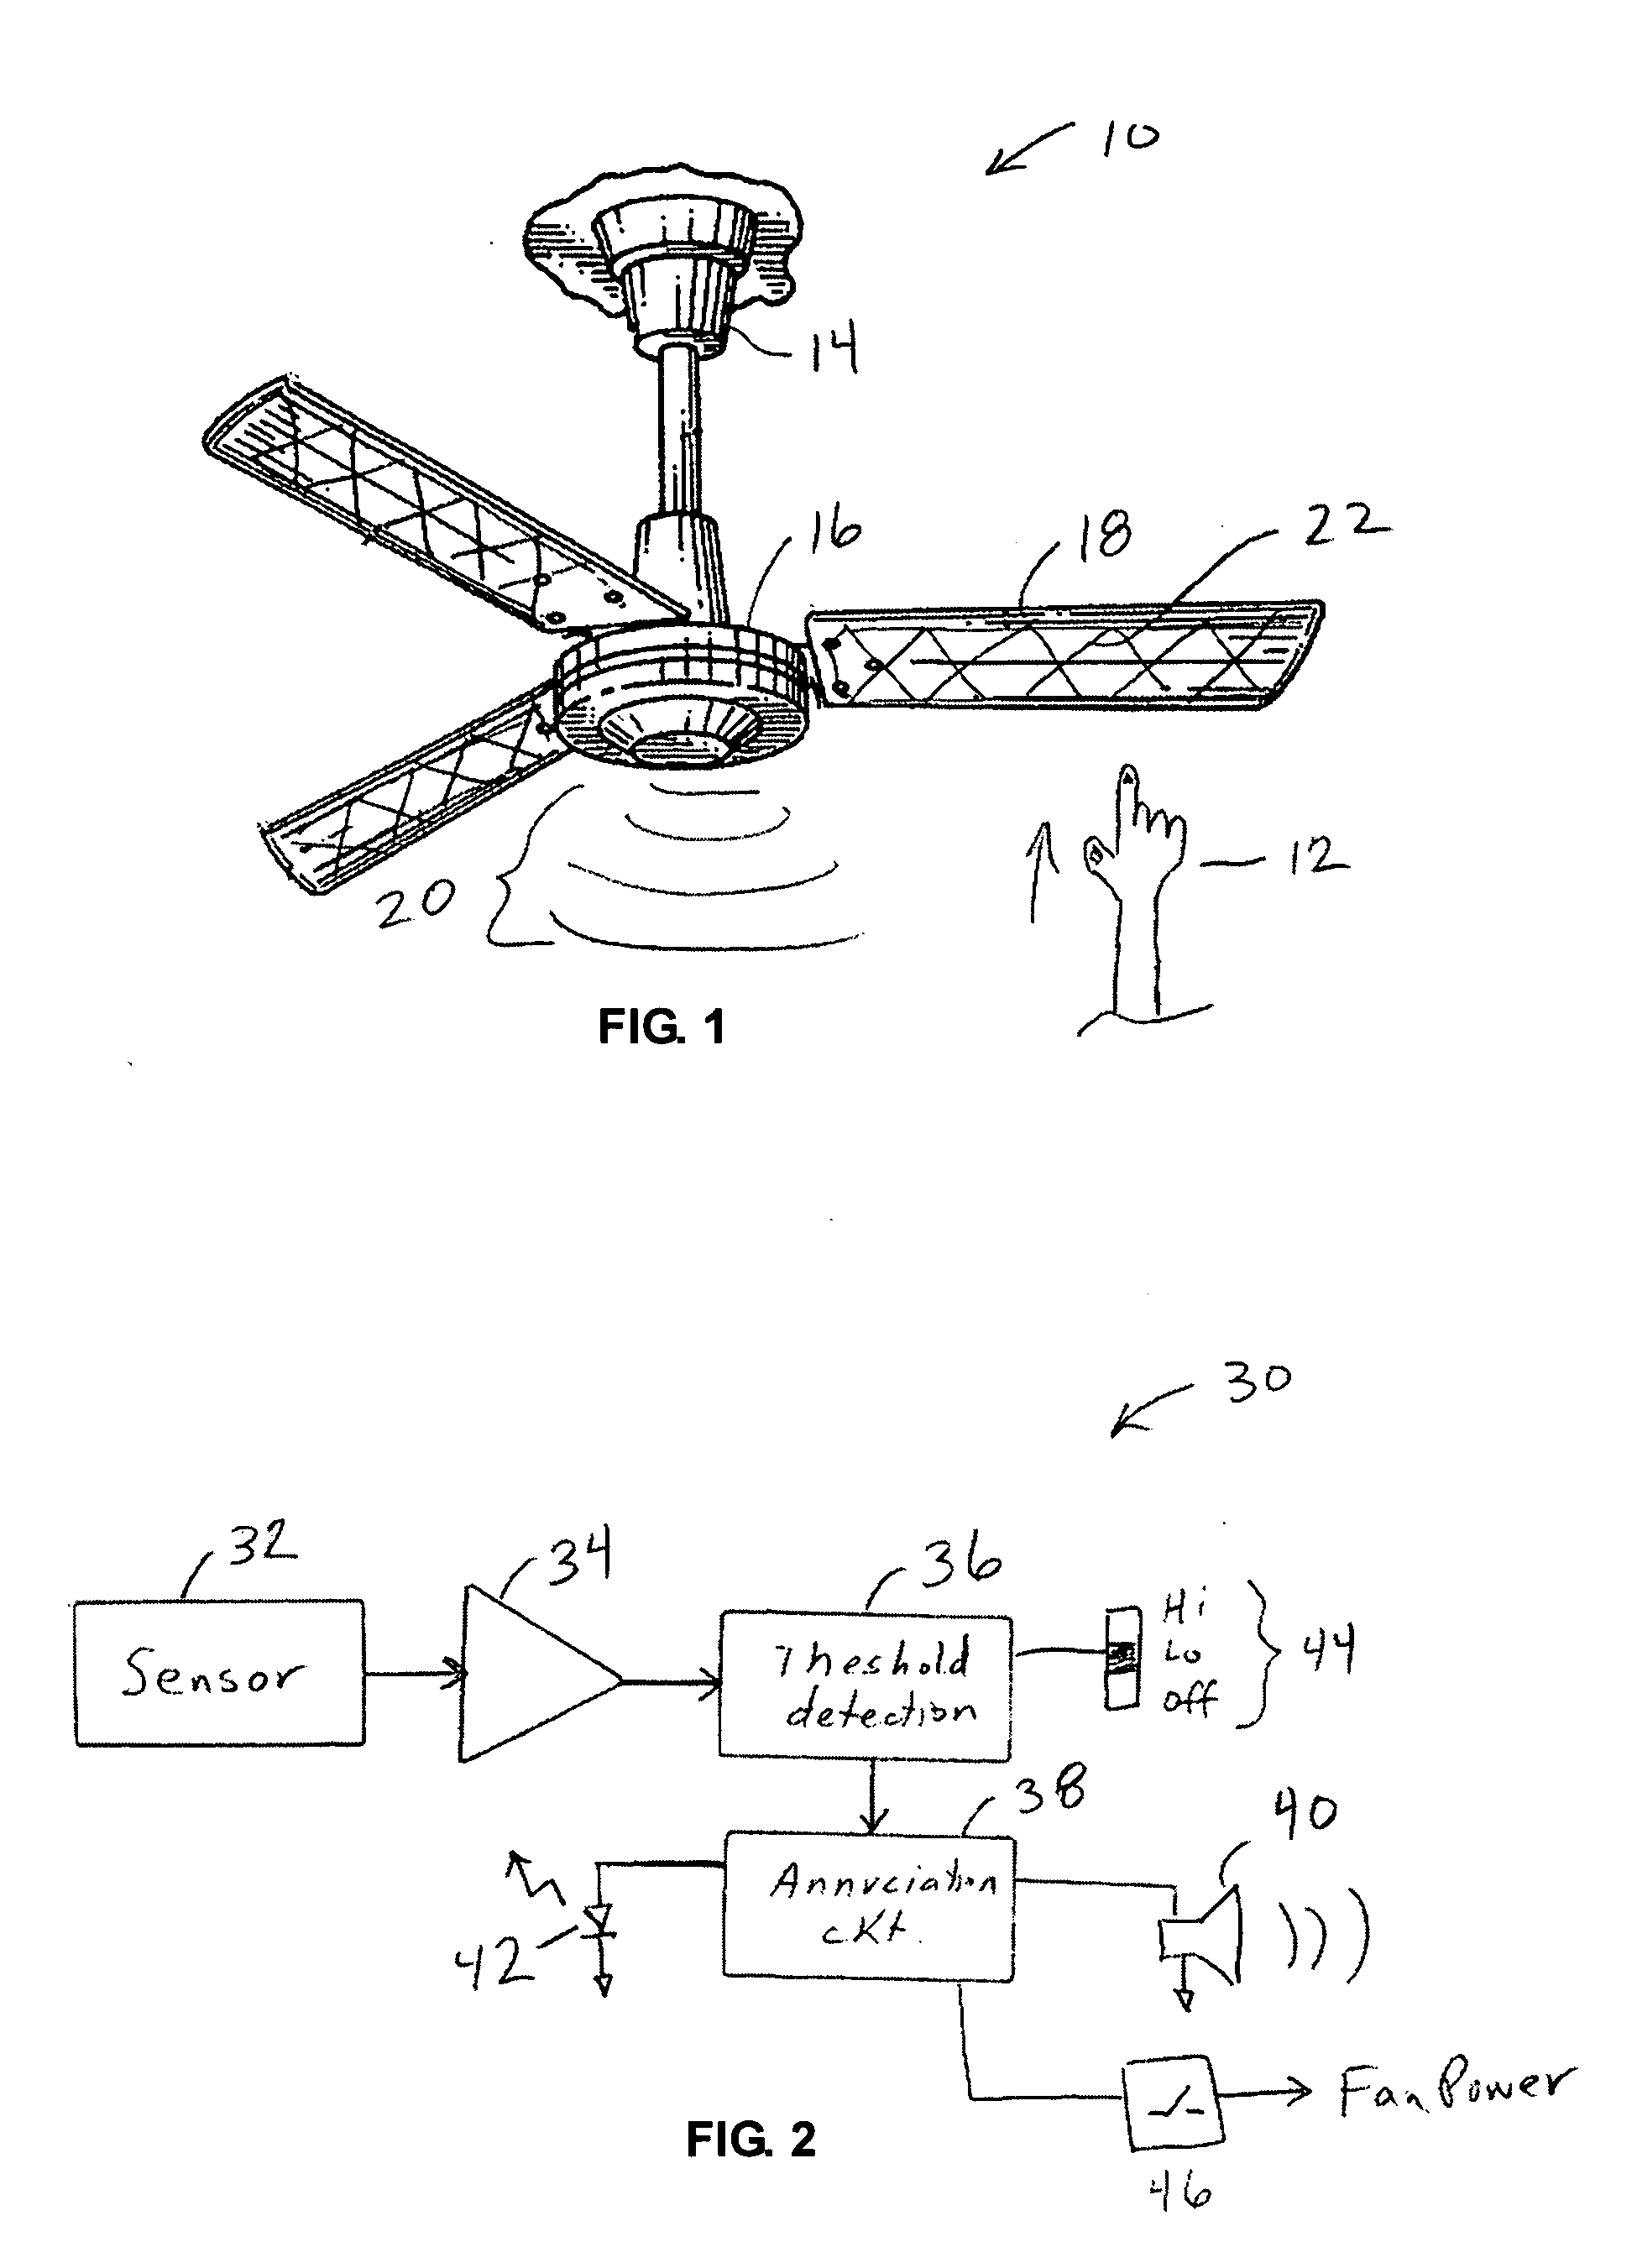 Ceiling fan proximity safety apparatus